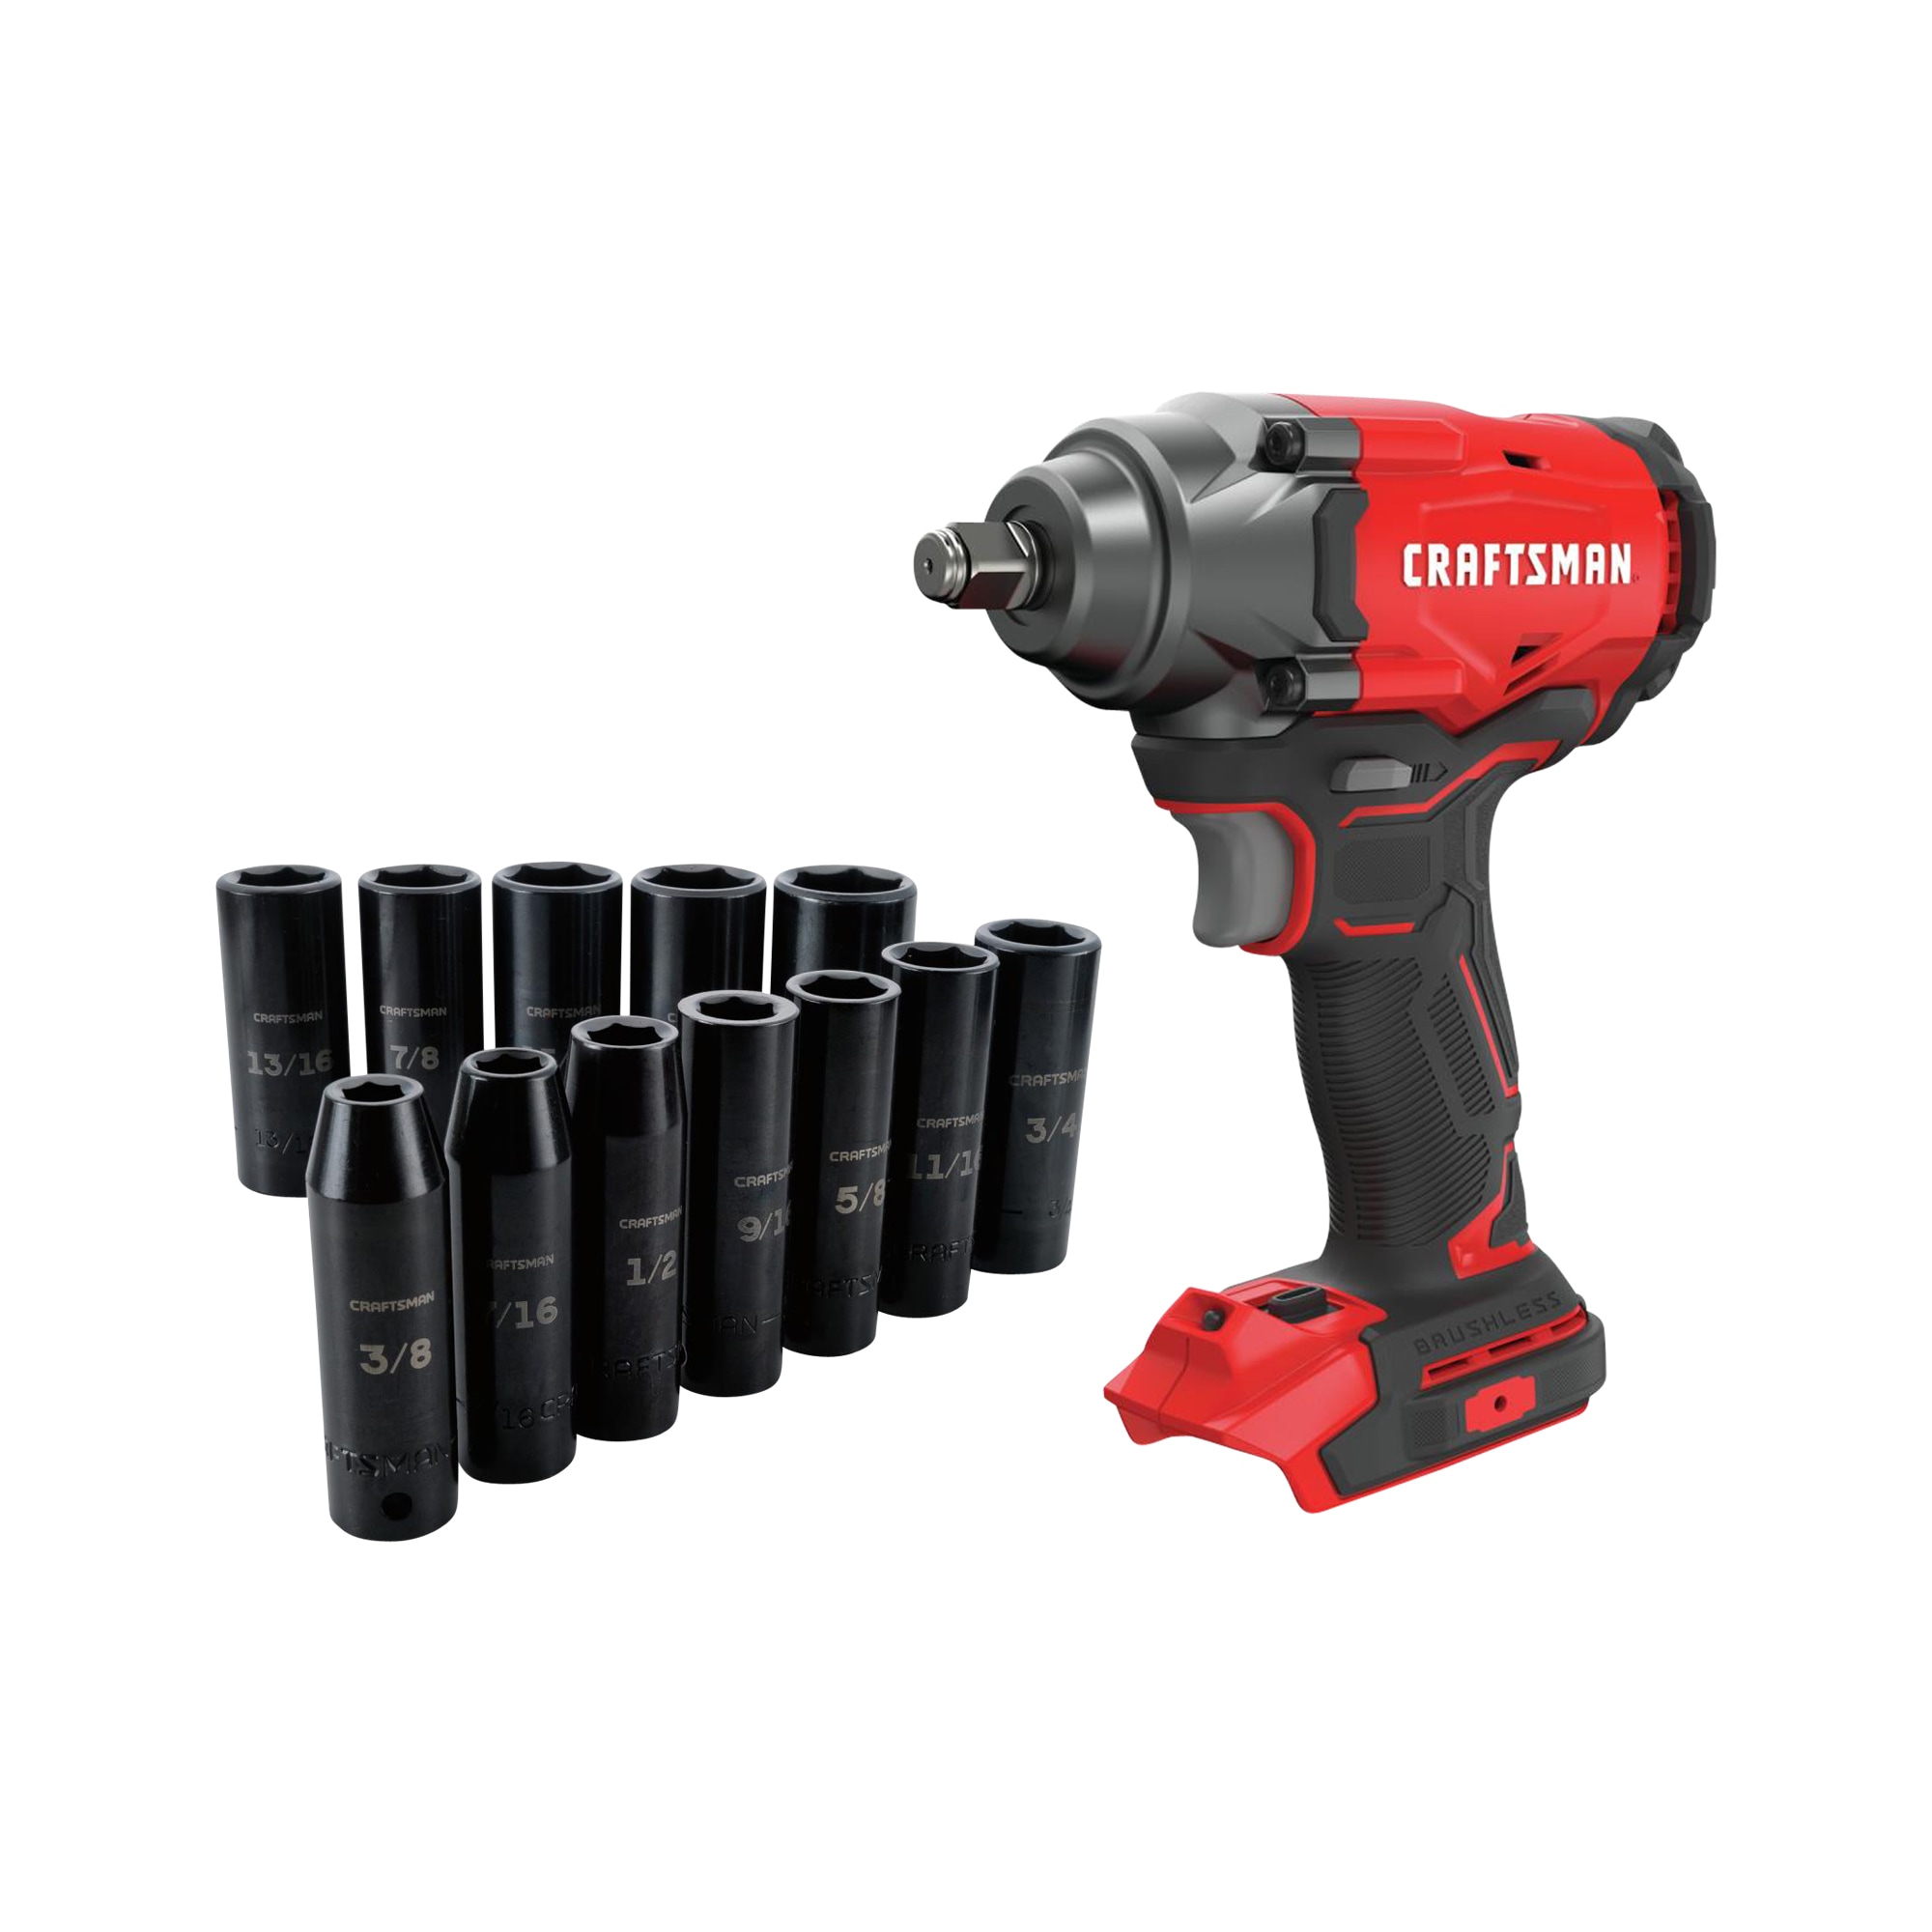 CRAFTSMAN V20-Amp 20-volt Max Variable Speed Brushless 1/2-in Drive Cordless Impact Wrench (Tool Only) & 12-Piece Standard (SAE) 1/2-in Drive 6-Point